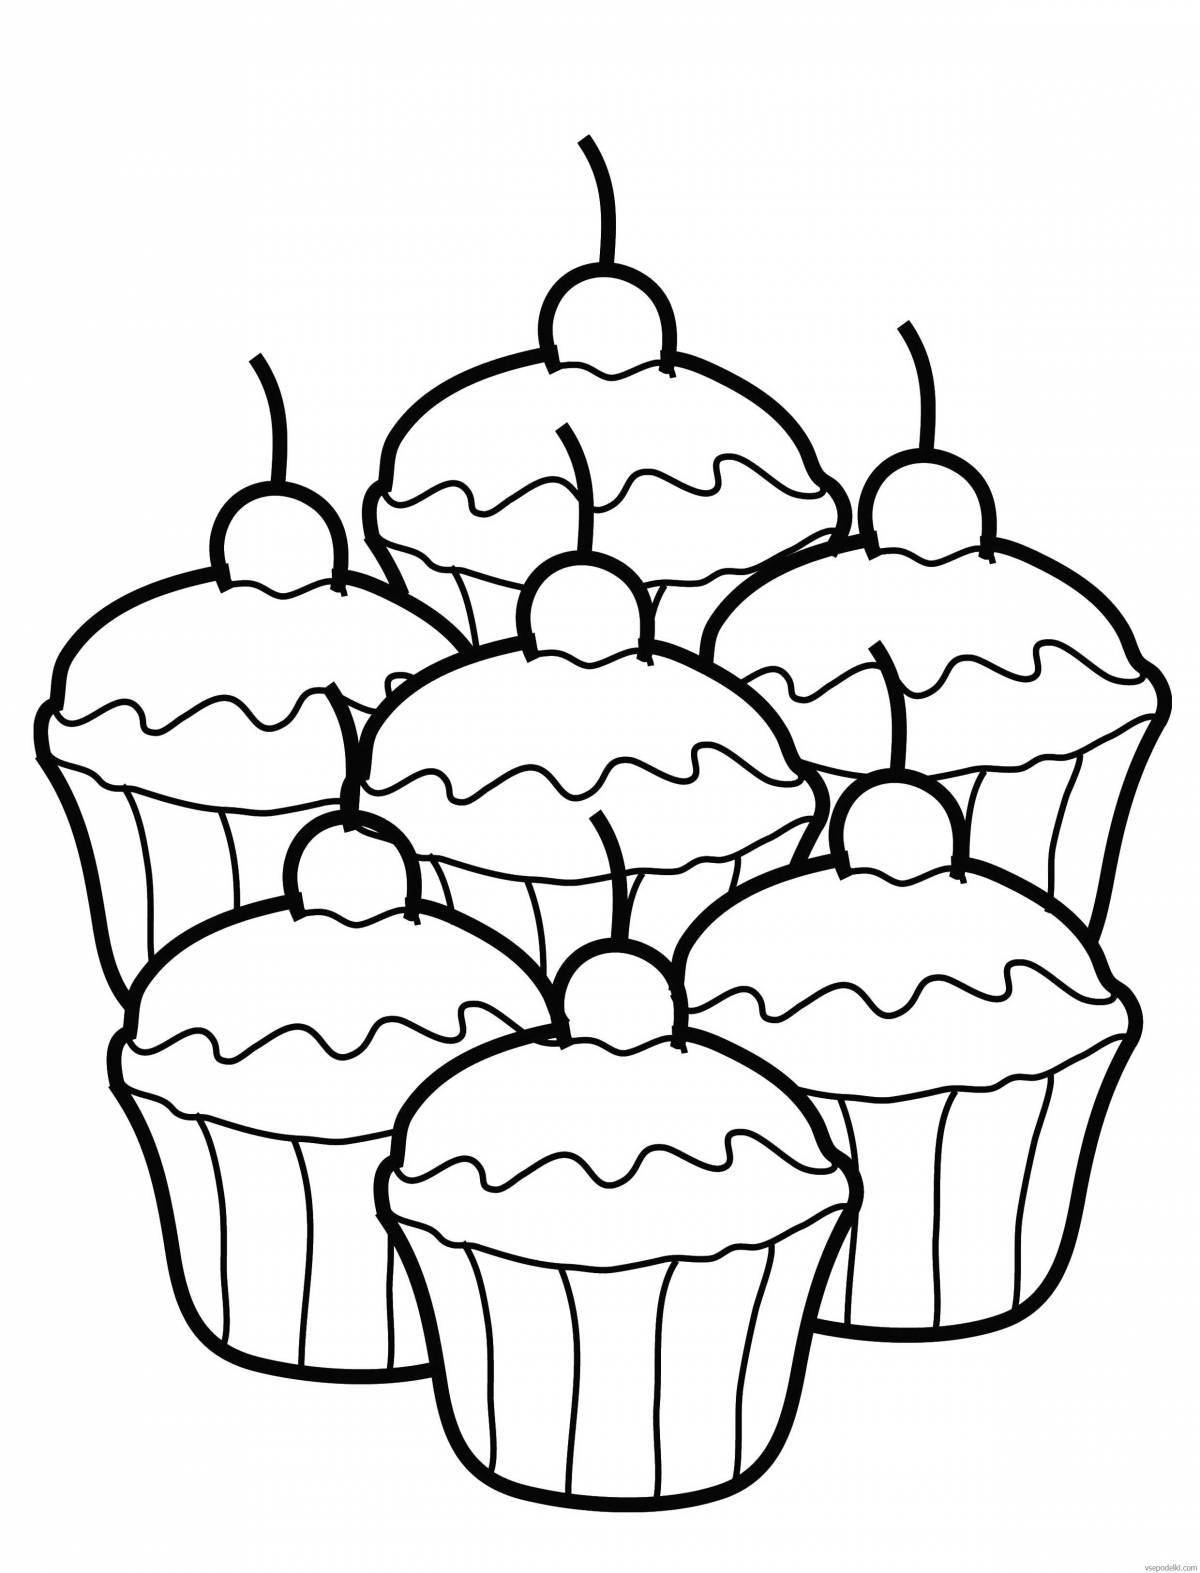 Appetizing coloring pages